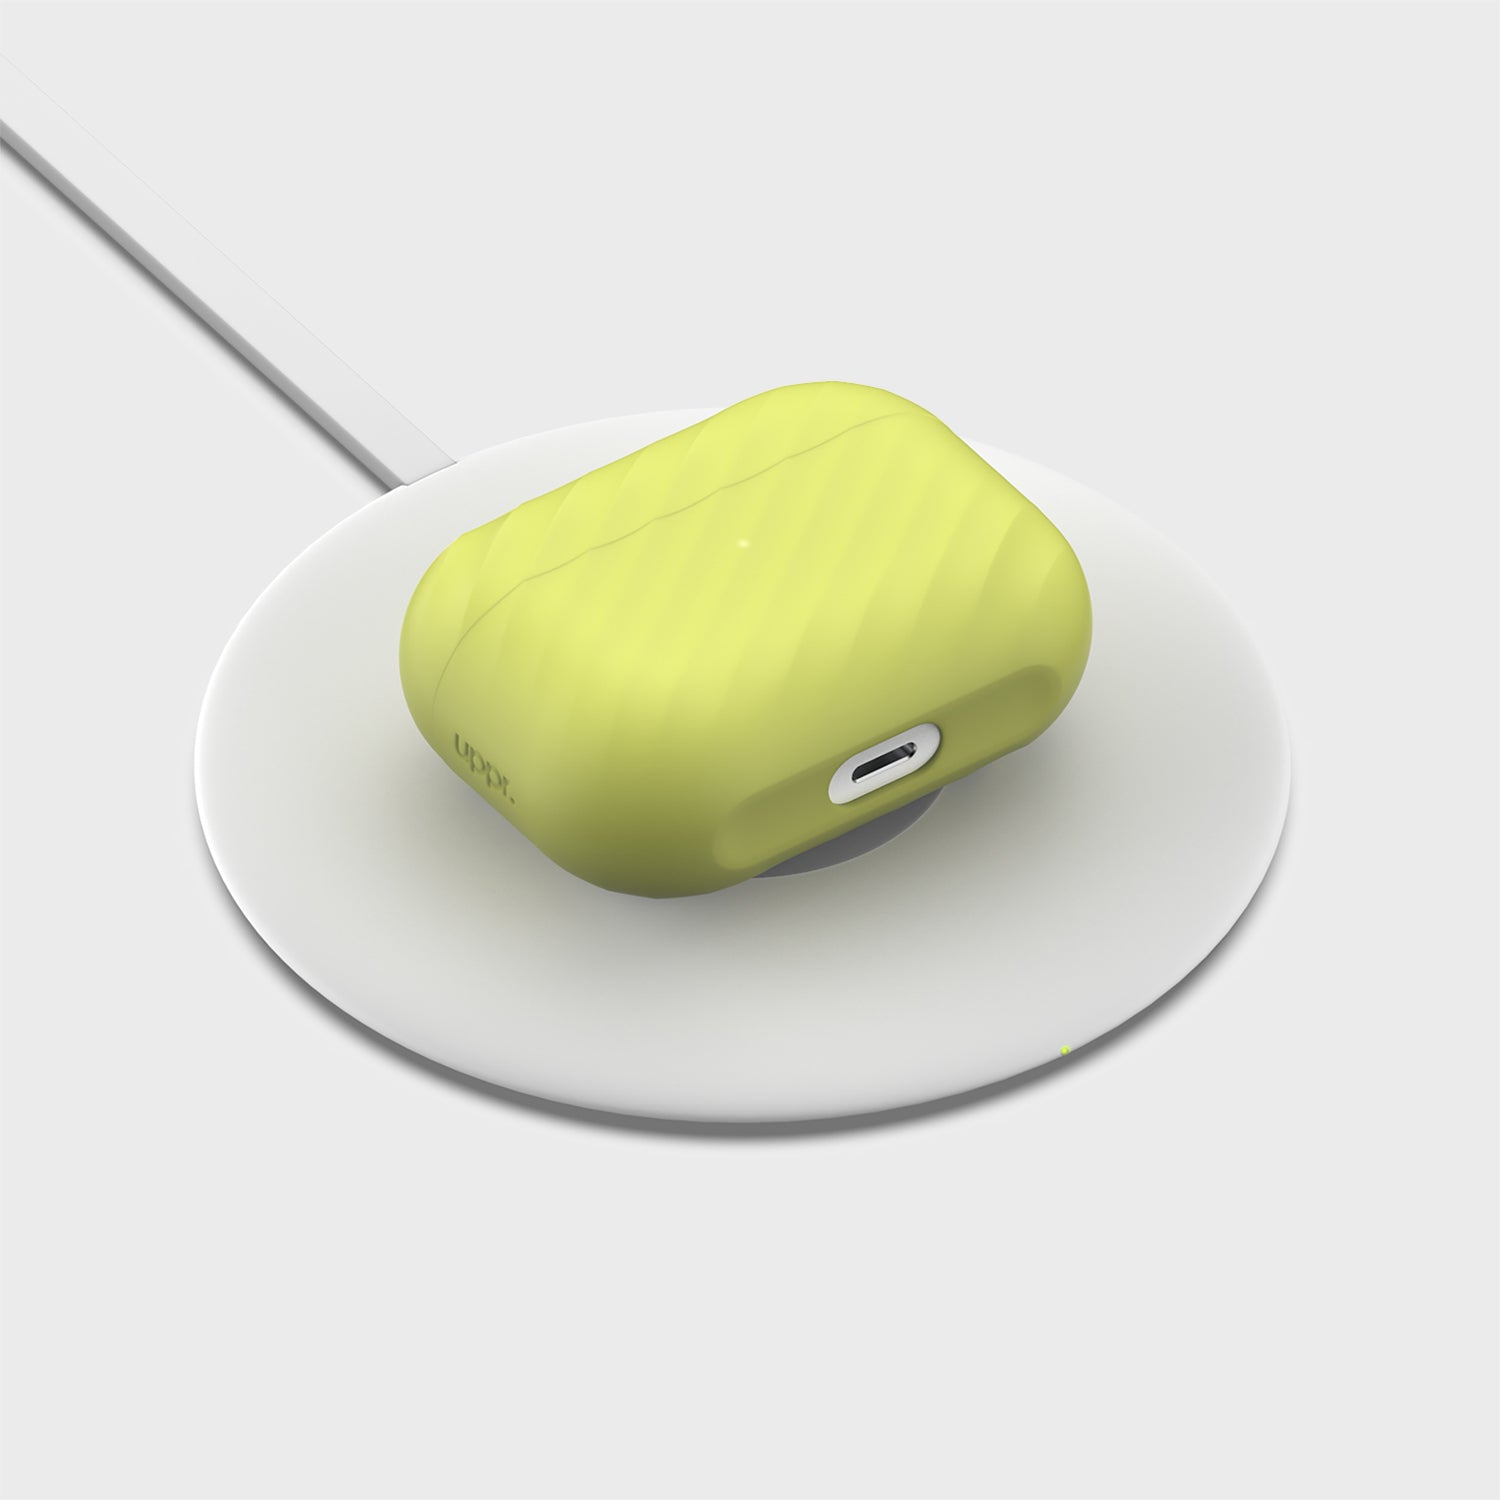 NimbleShell™ Silicone Protective Case for Airpods